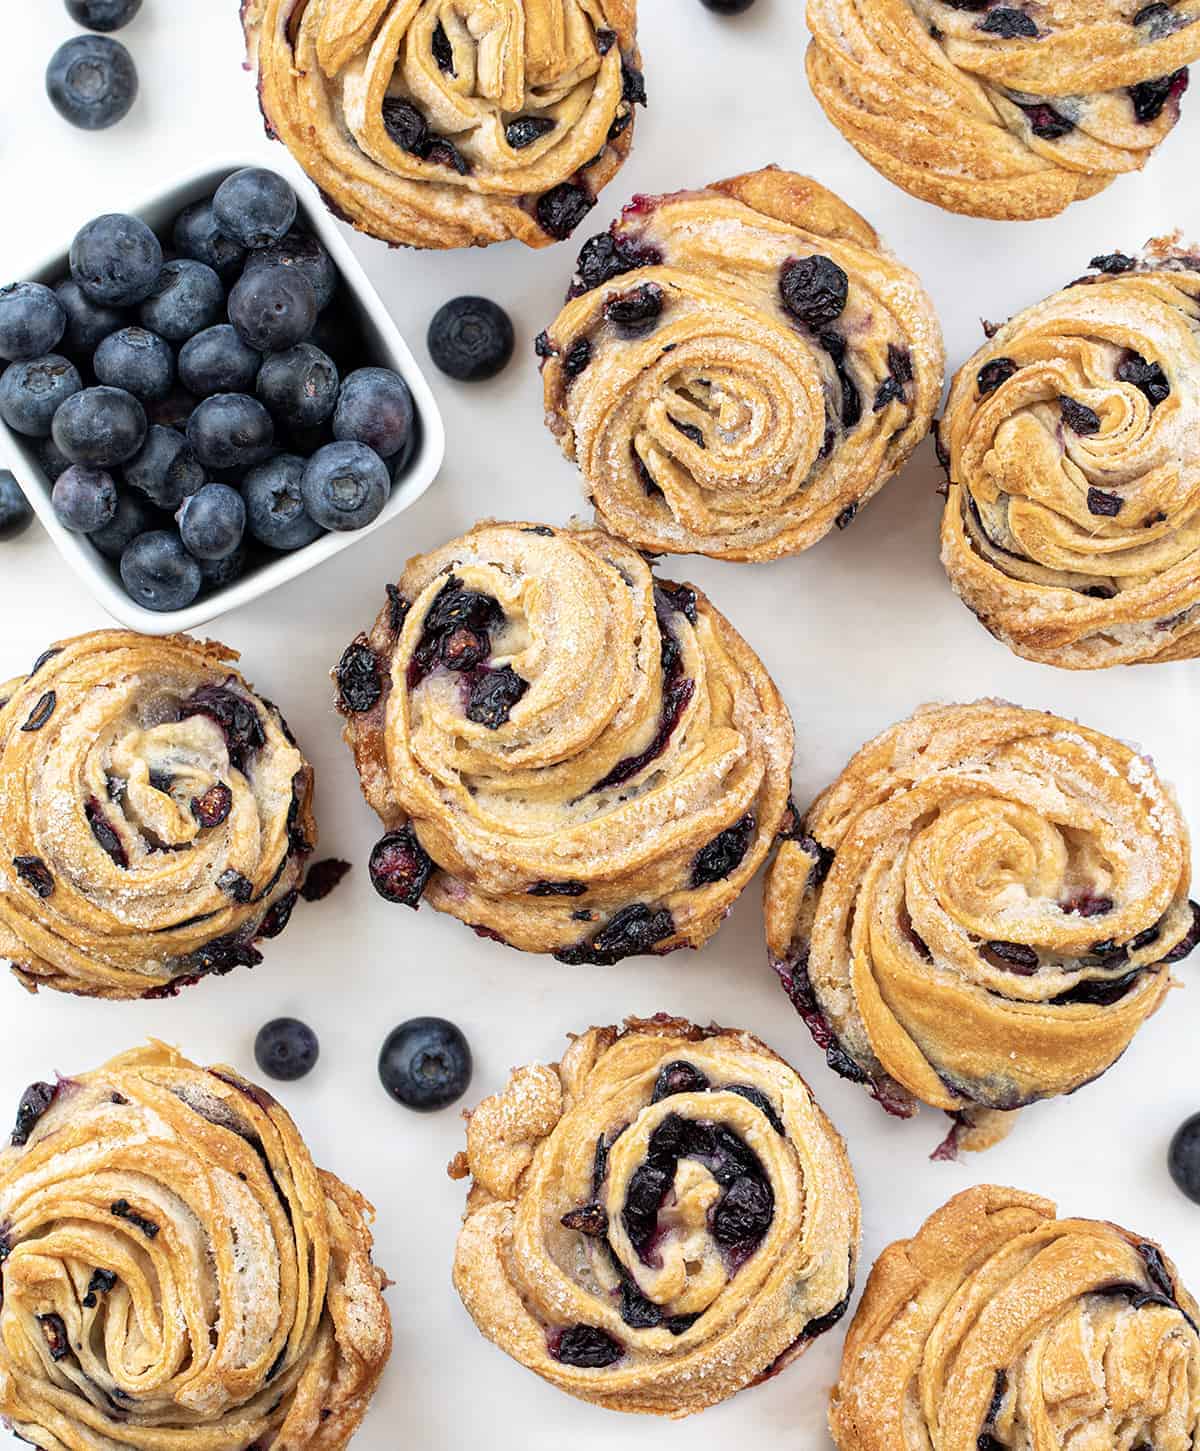 Blueberry Bliss Crescents: A Heavenly Twist on Blueberry Treats